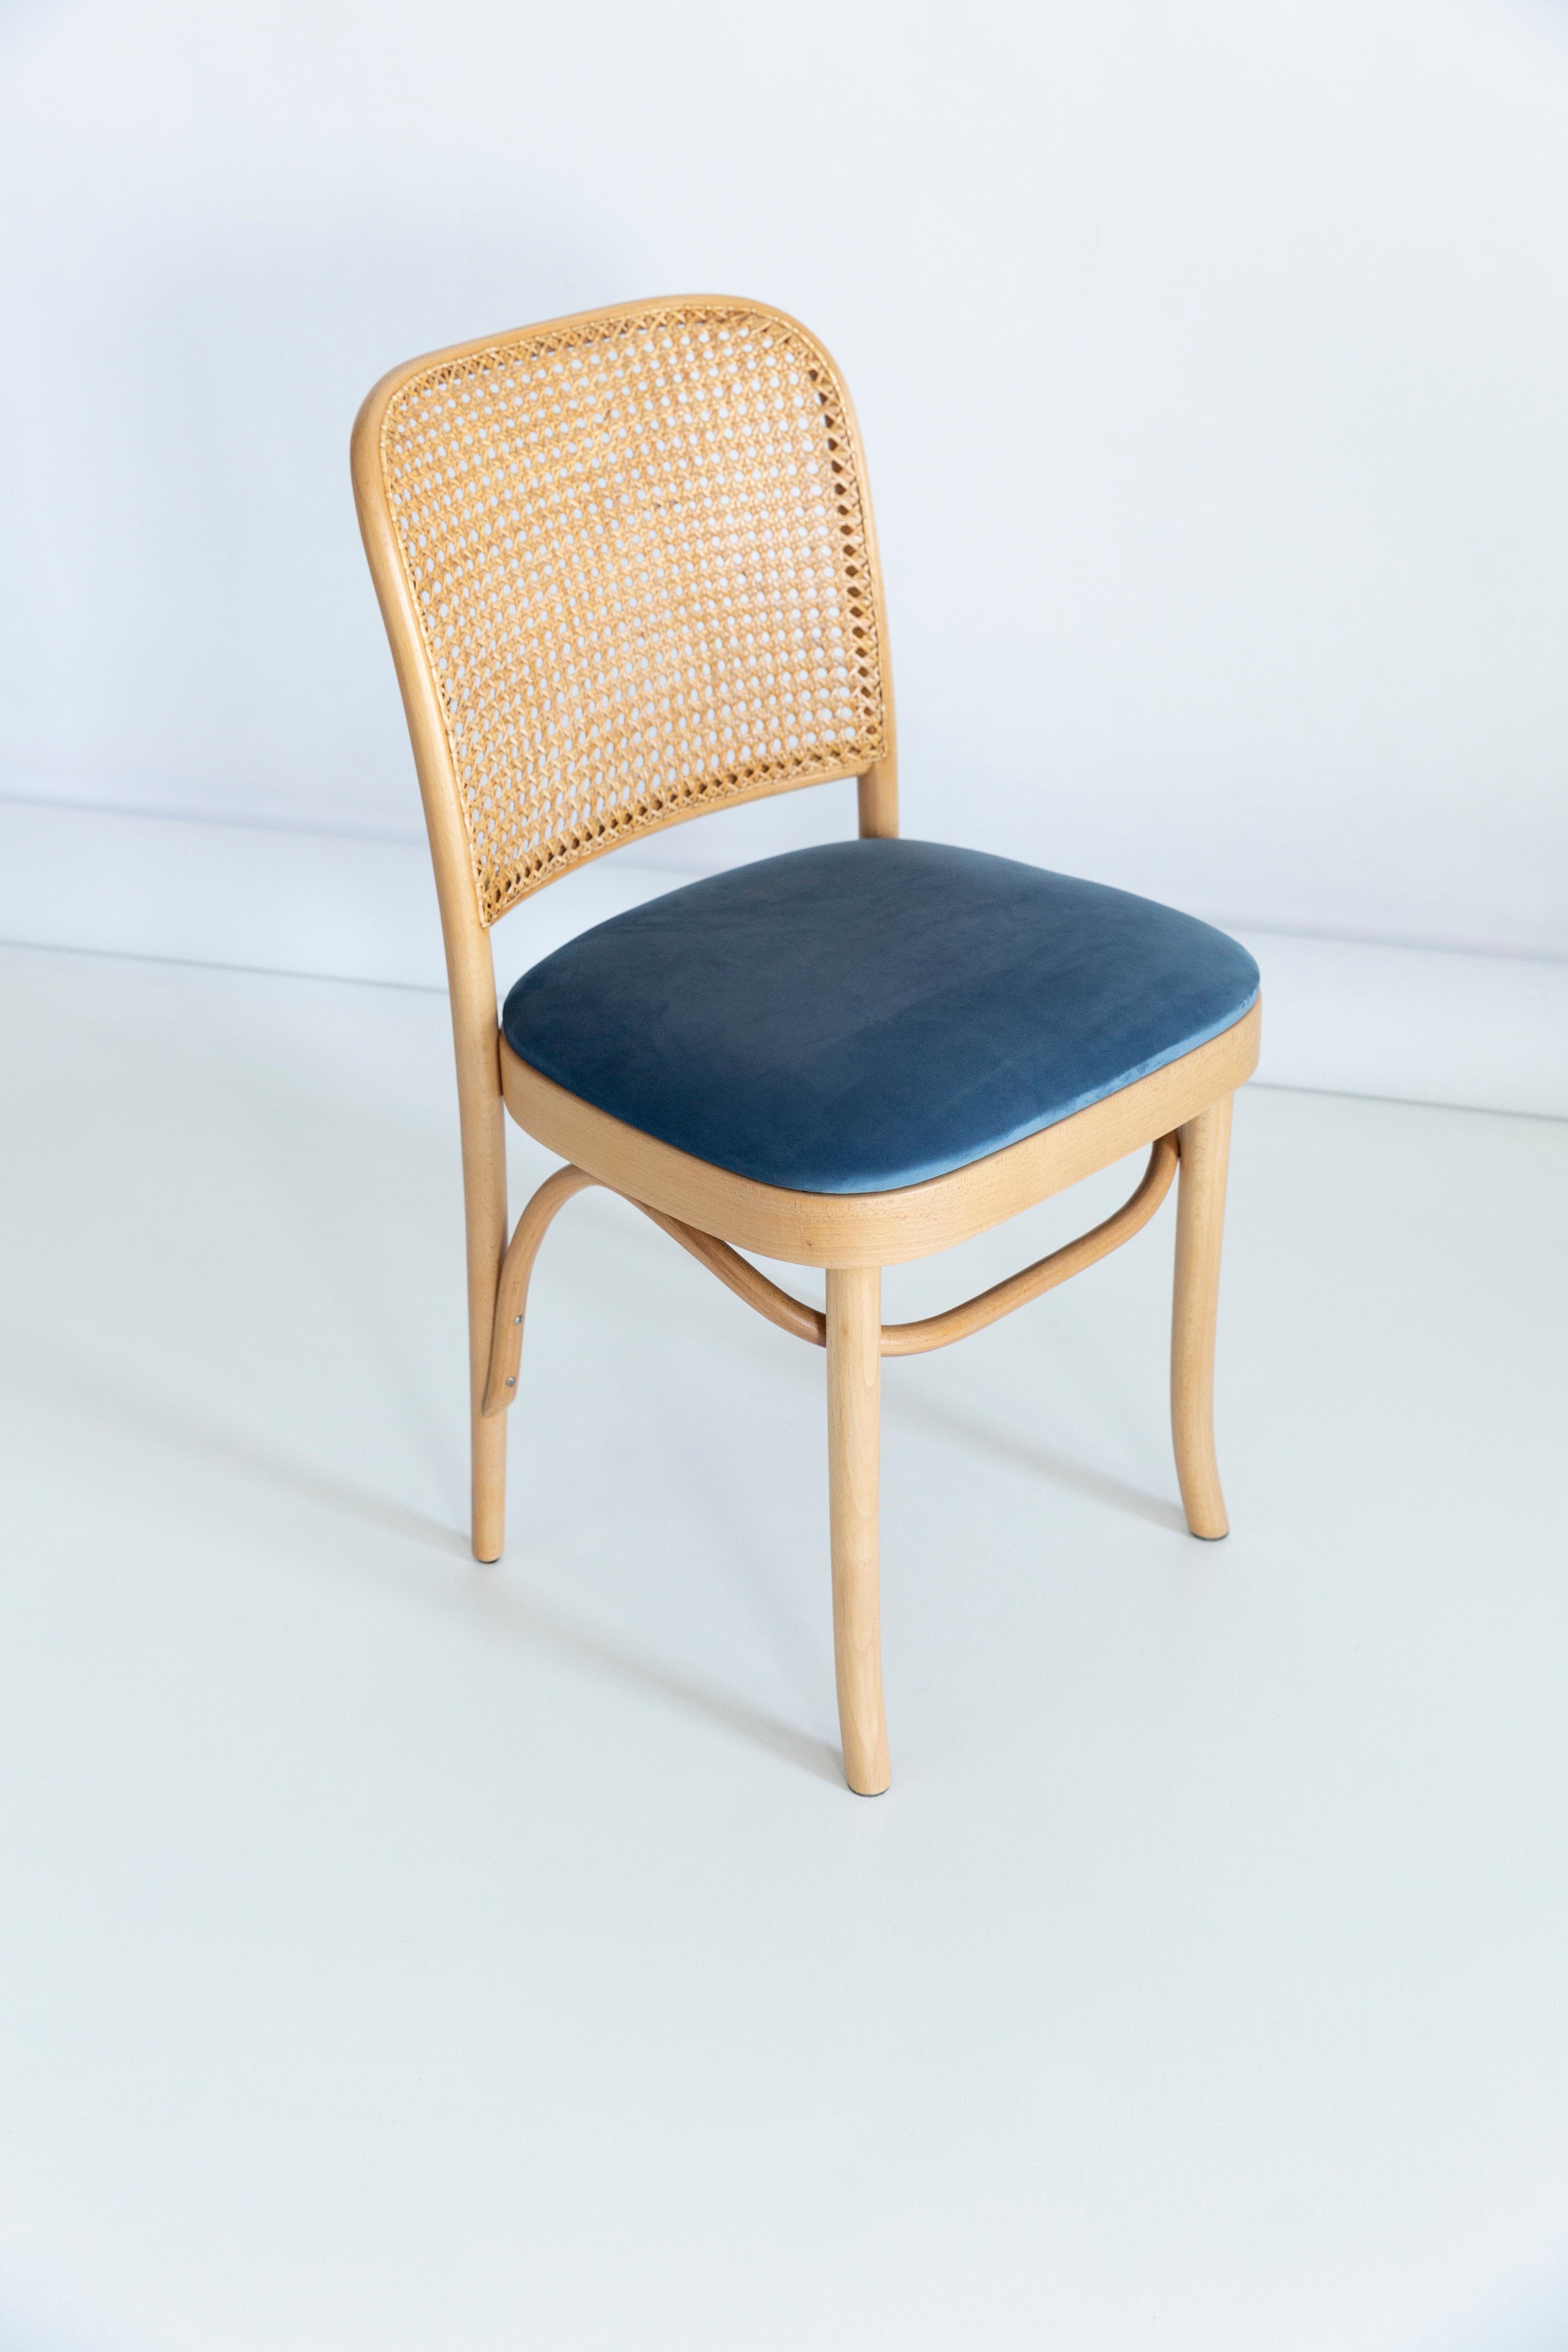 Set of Five Blue Velvet Thonet Wood Rattan Chairs, 1960s For Sale 4